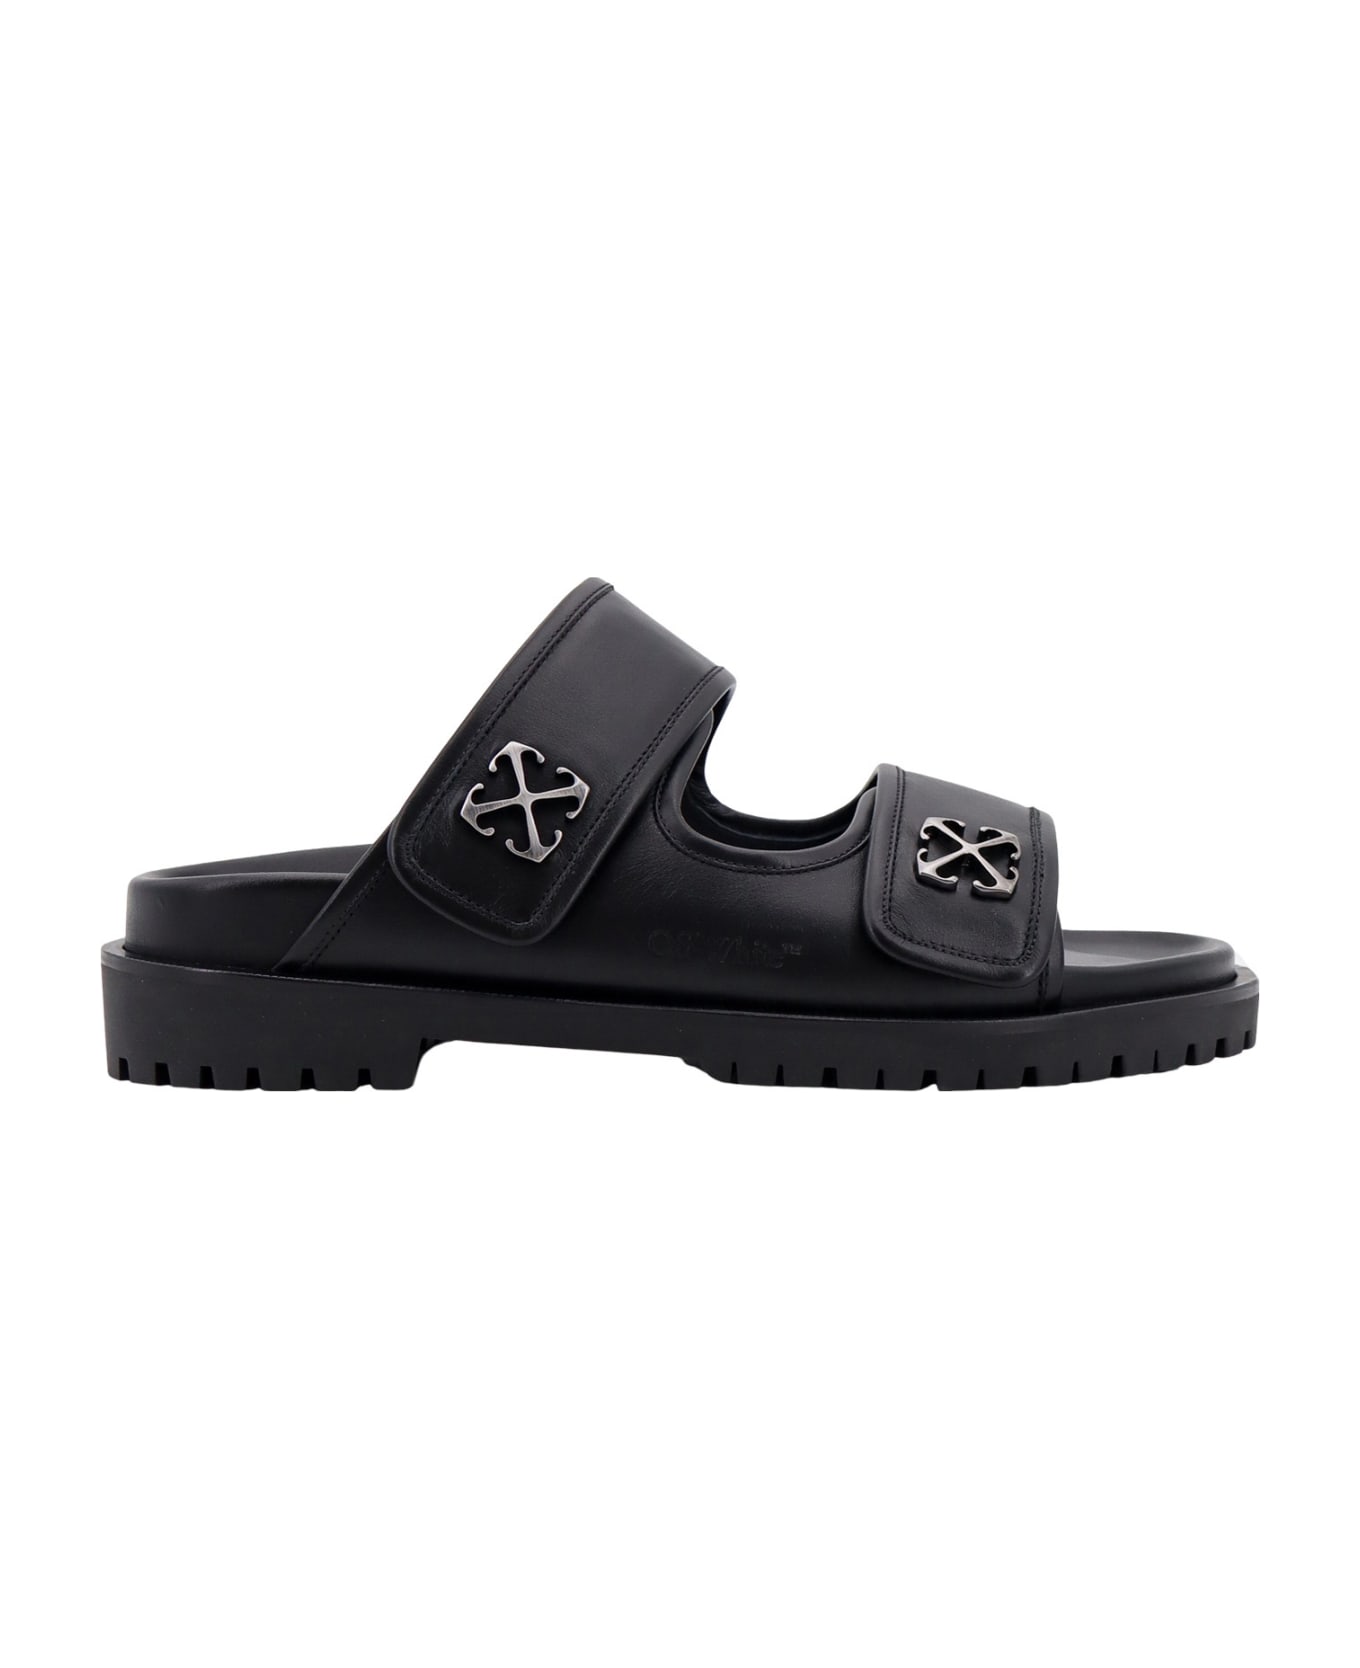 Off-White Sandals - Black Silv その他各種シューズ